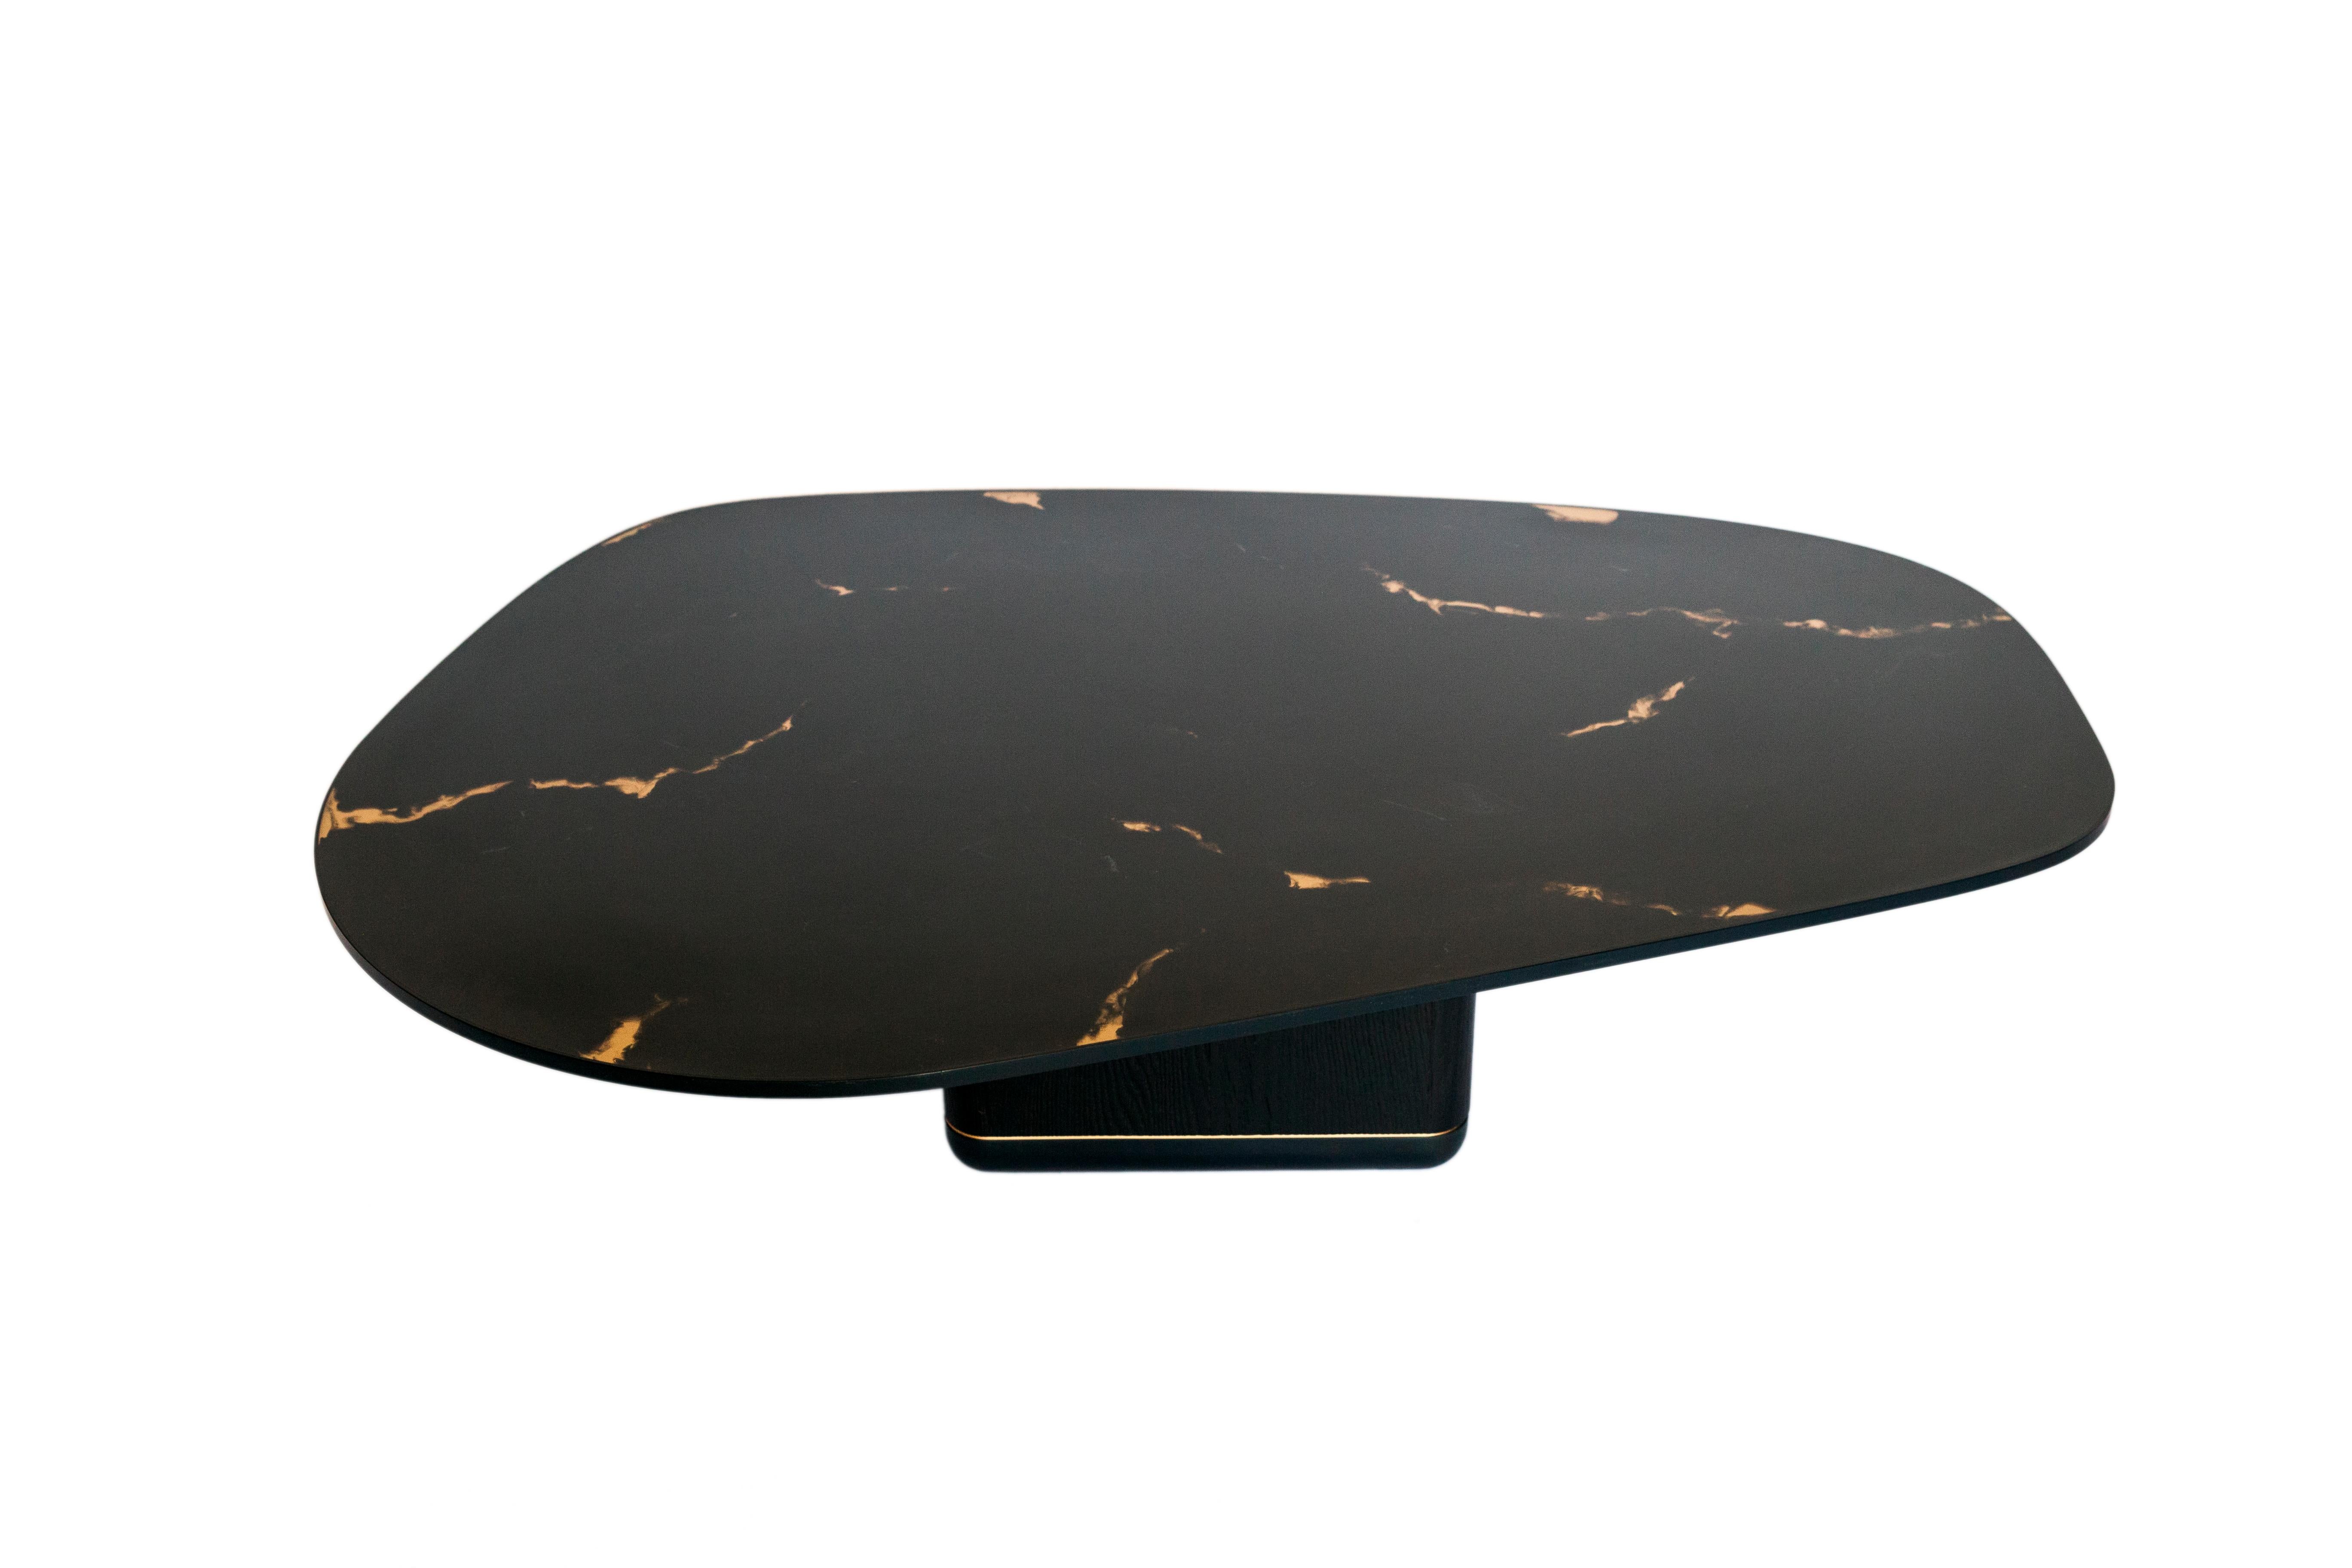 The sleek and striking curved jasper coffee table features a charred black oak base with blackened steel and bronze banding, and a black marbled rose bronze encased in resin tabletop with blackened steel banding.

Dimensions as shown: L 50 in. / W